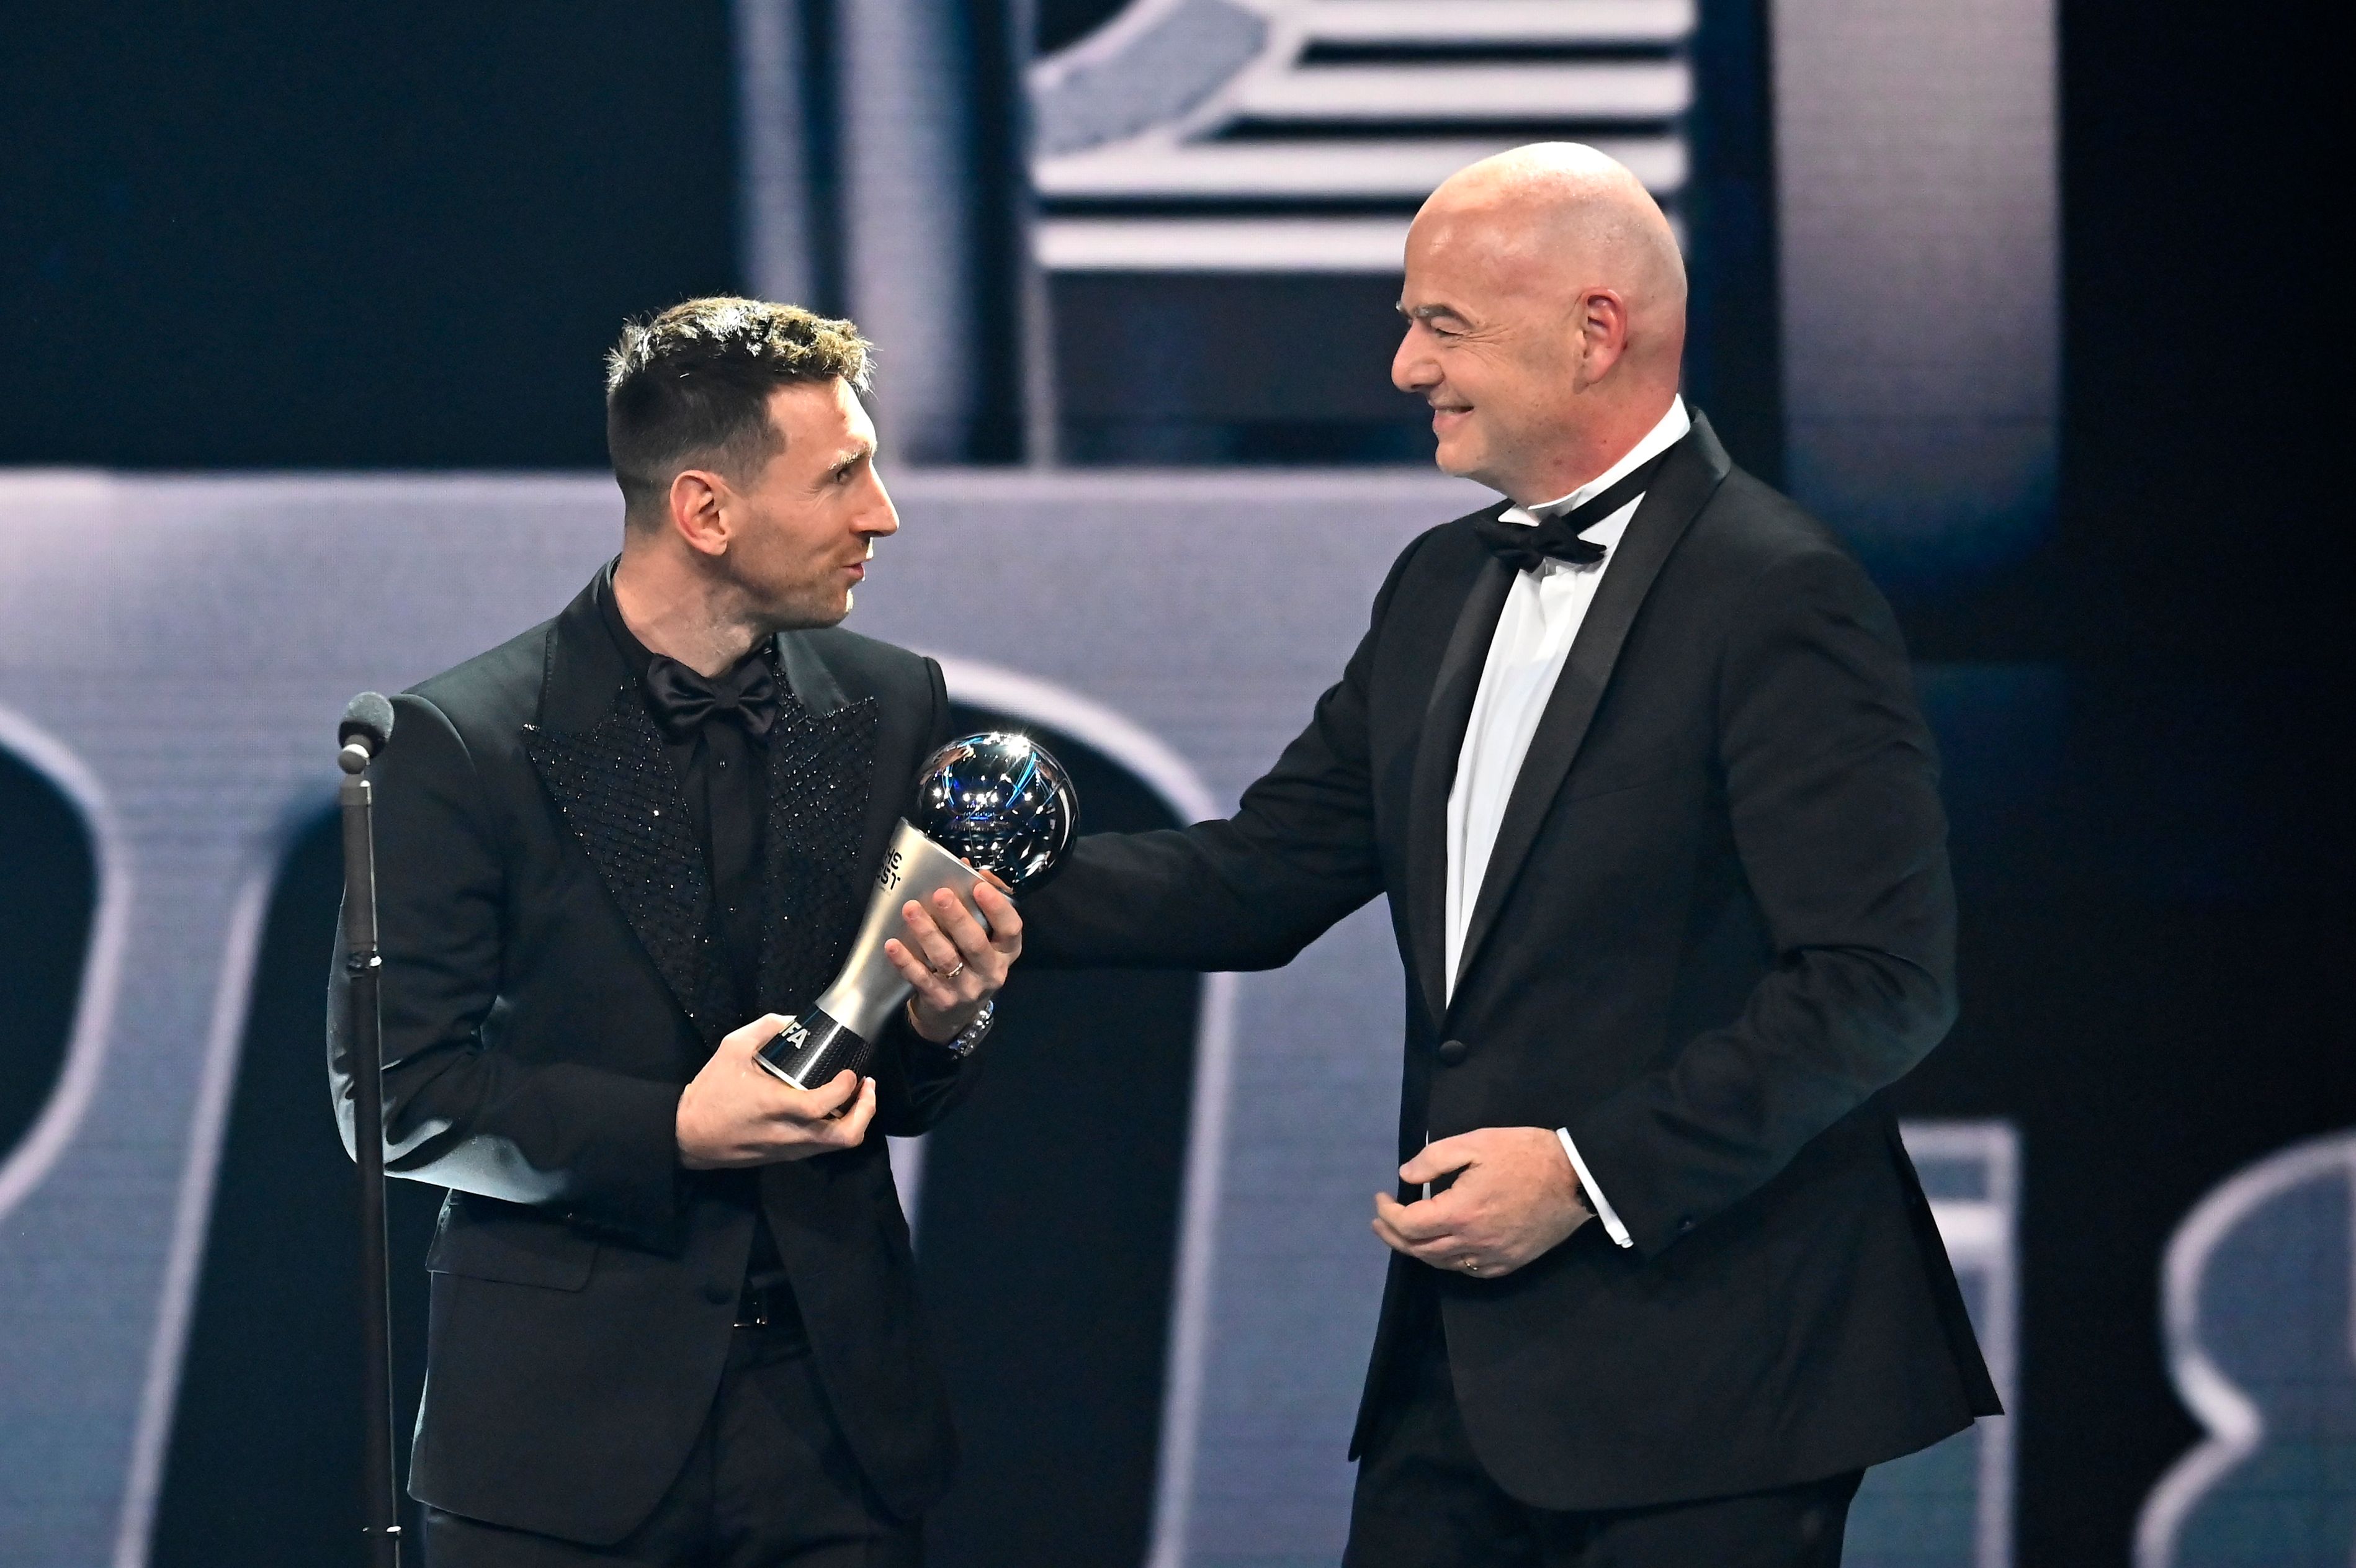 Lionel Messi won FIFA's The Best award